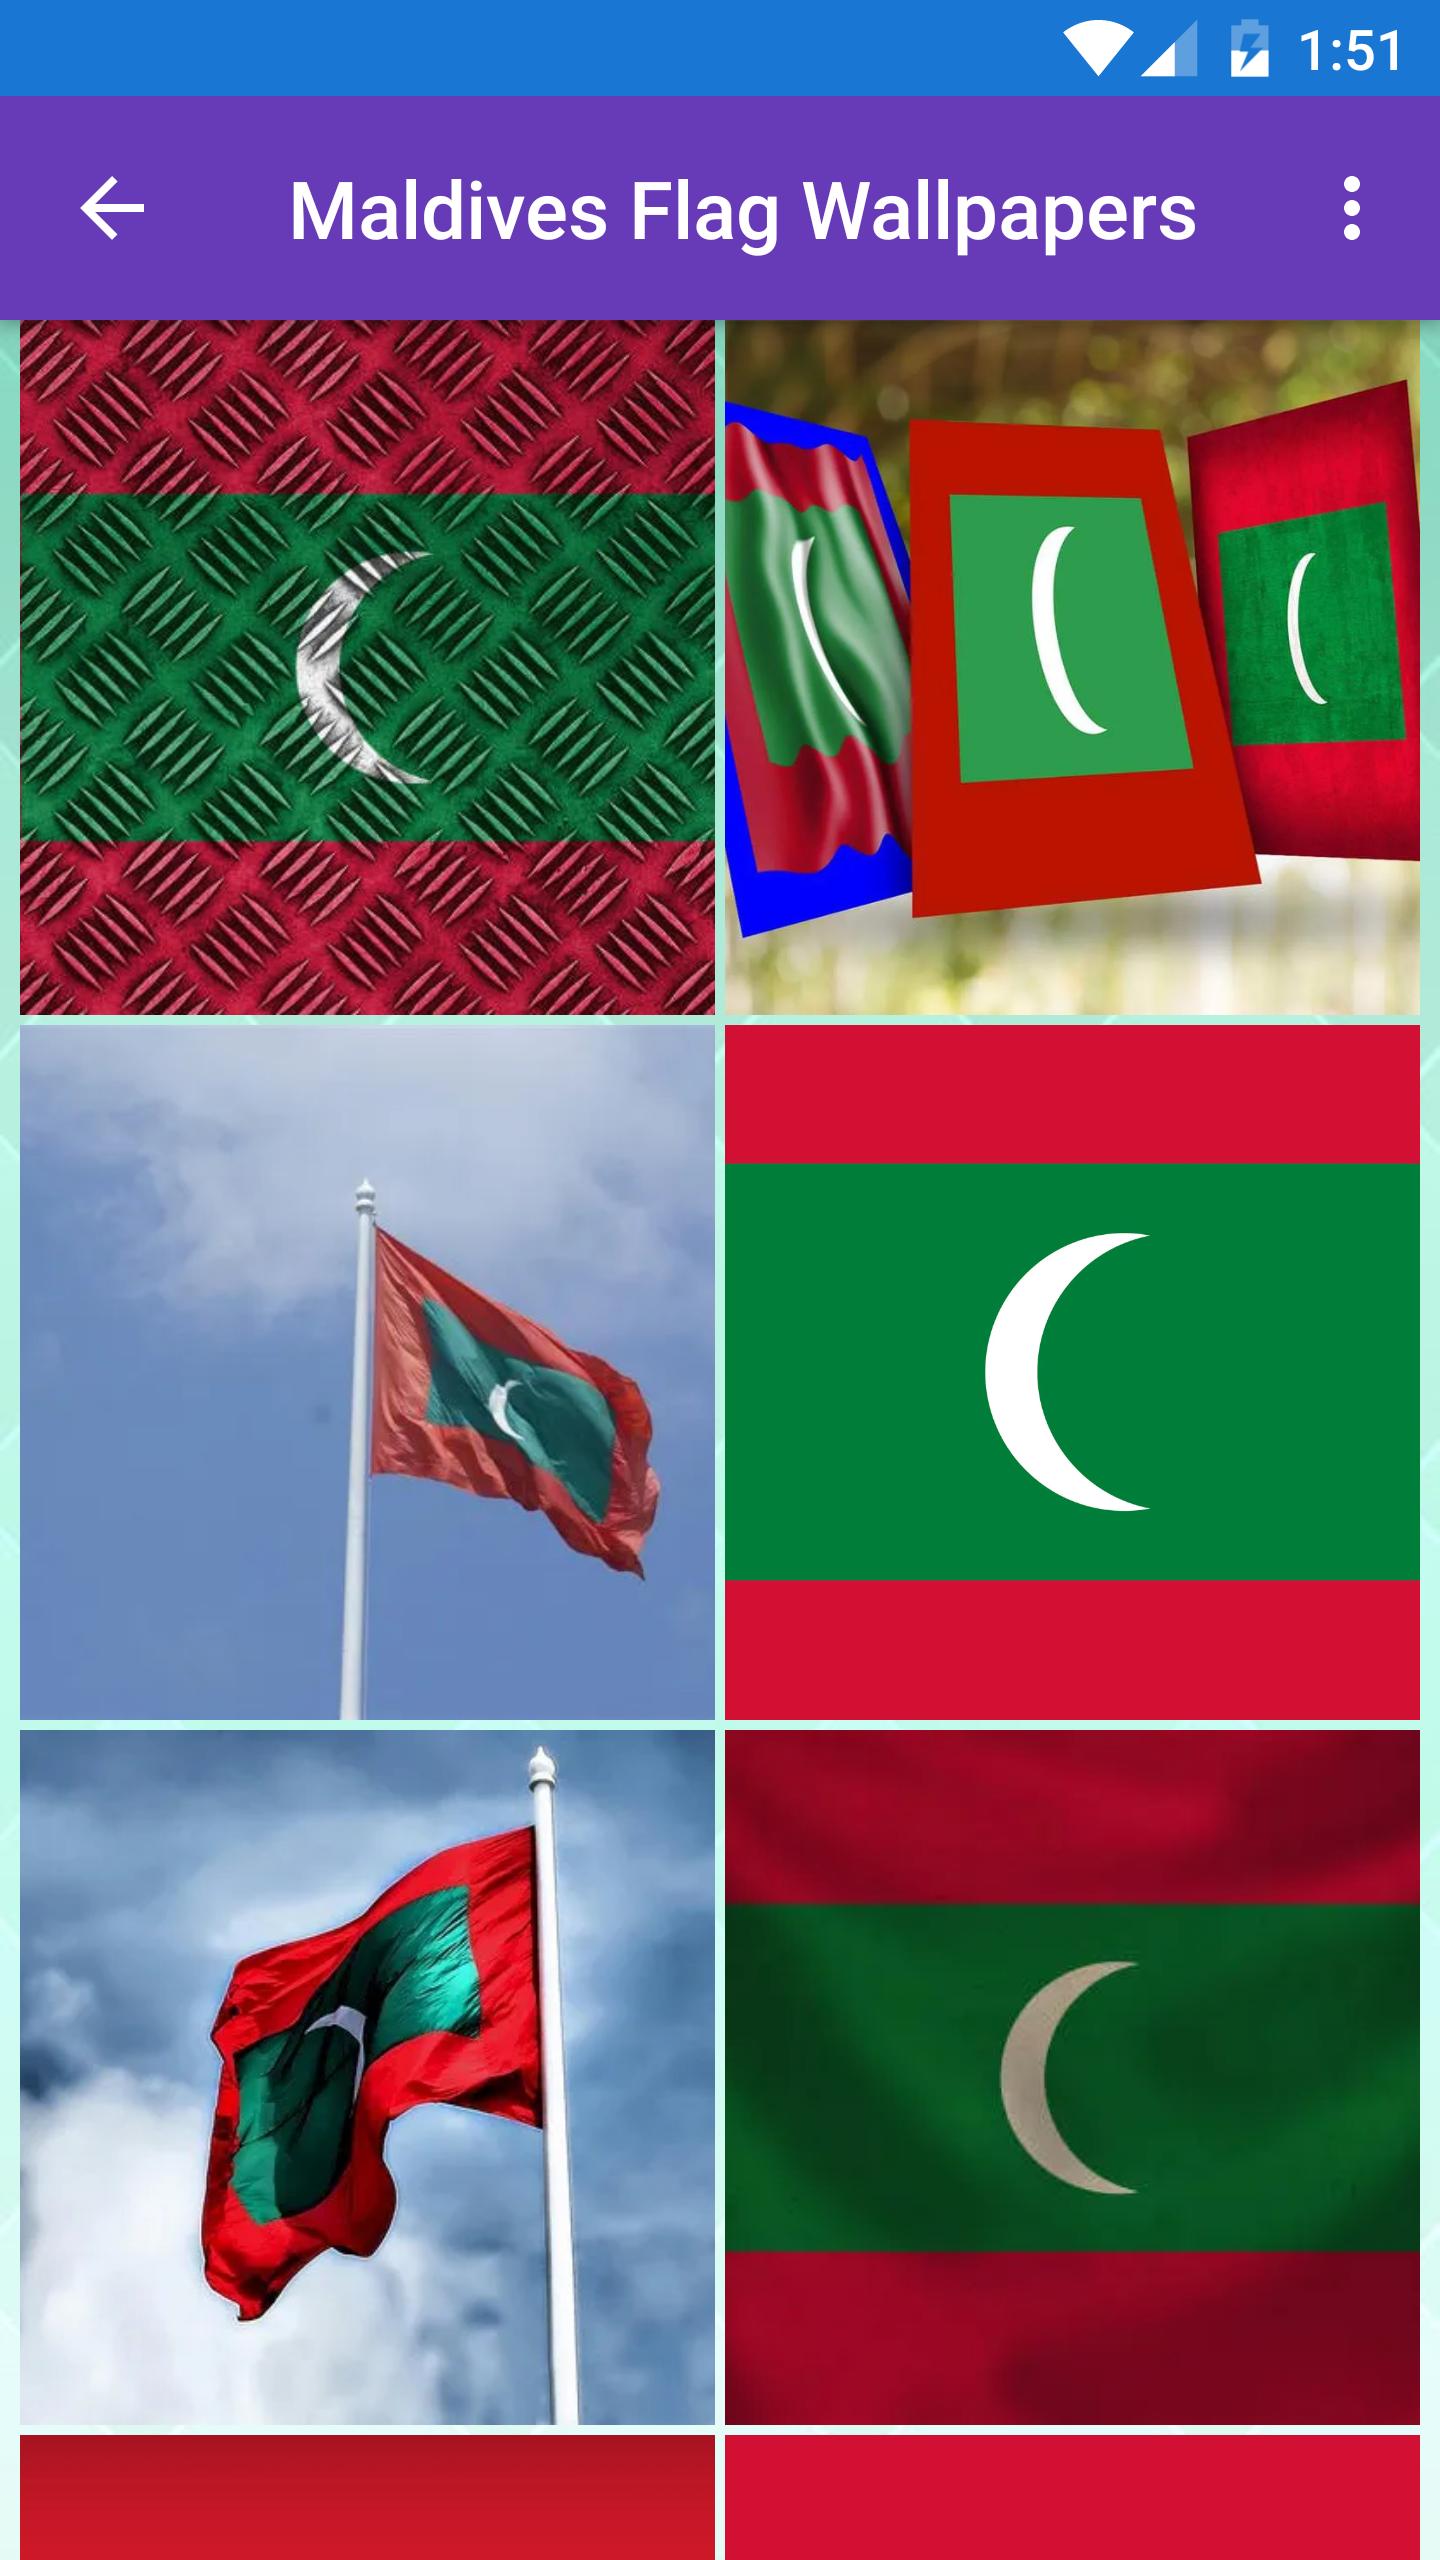 Maldives Flag Wallpaper Flags And Country Image For Android